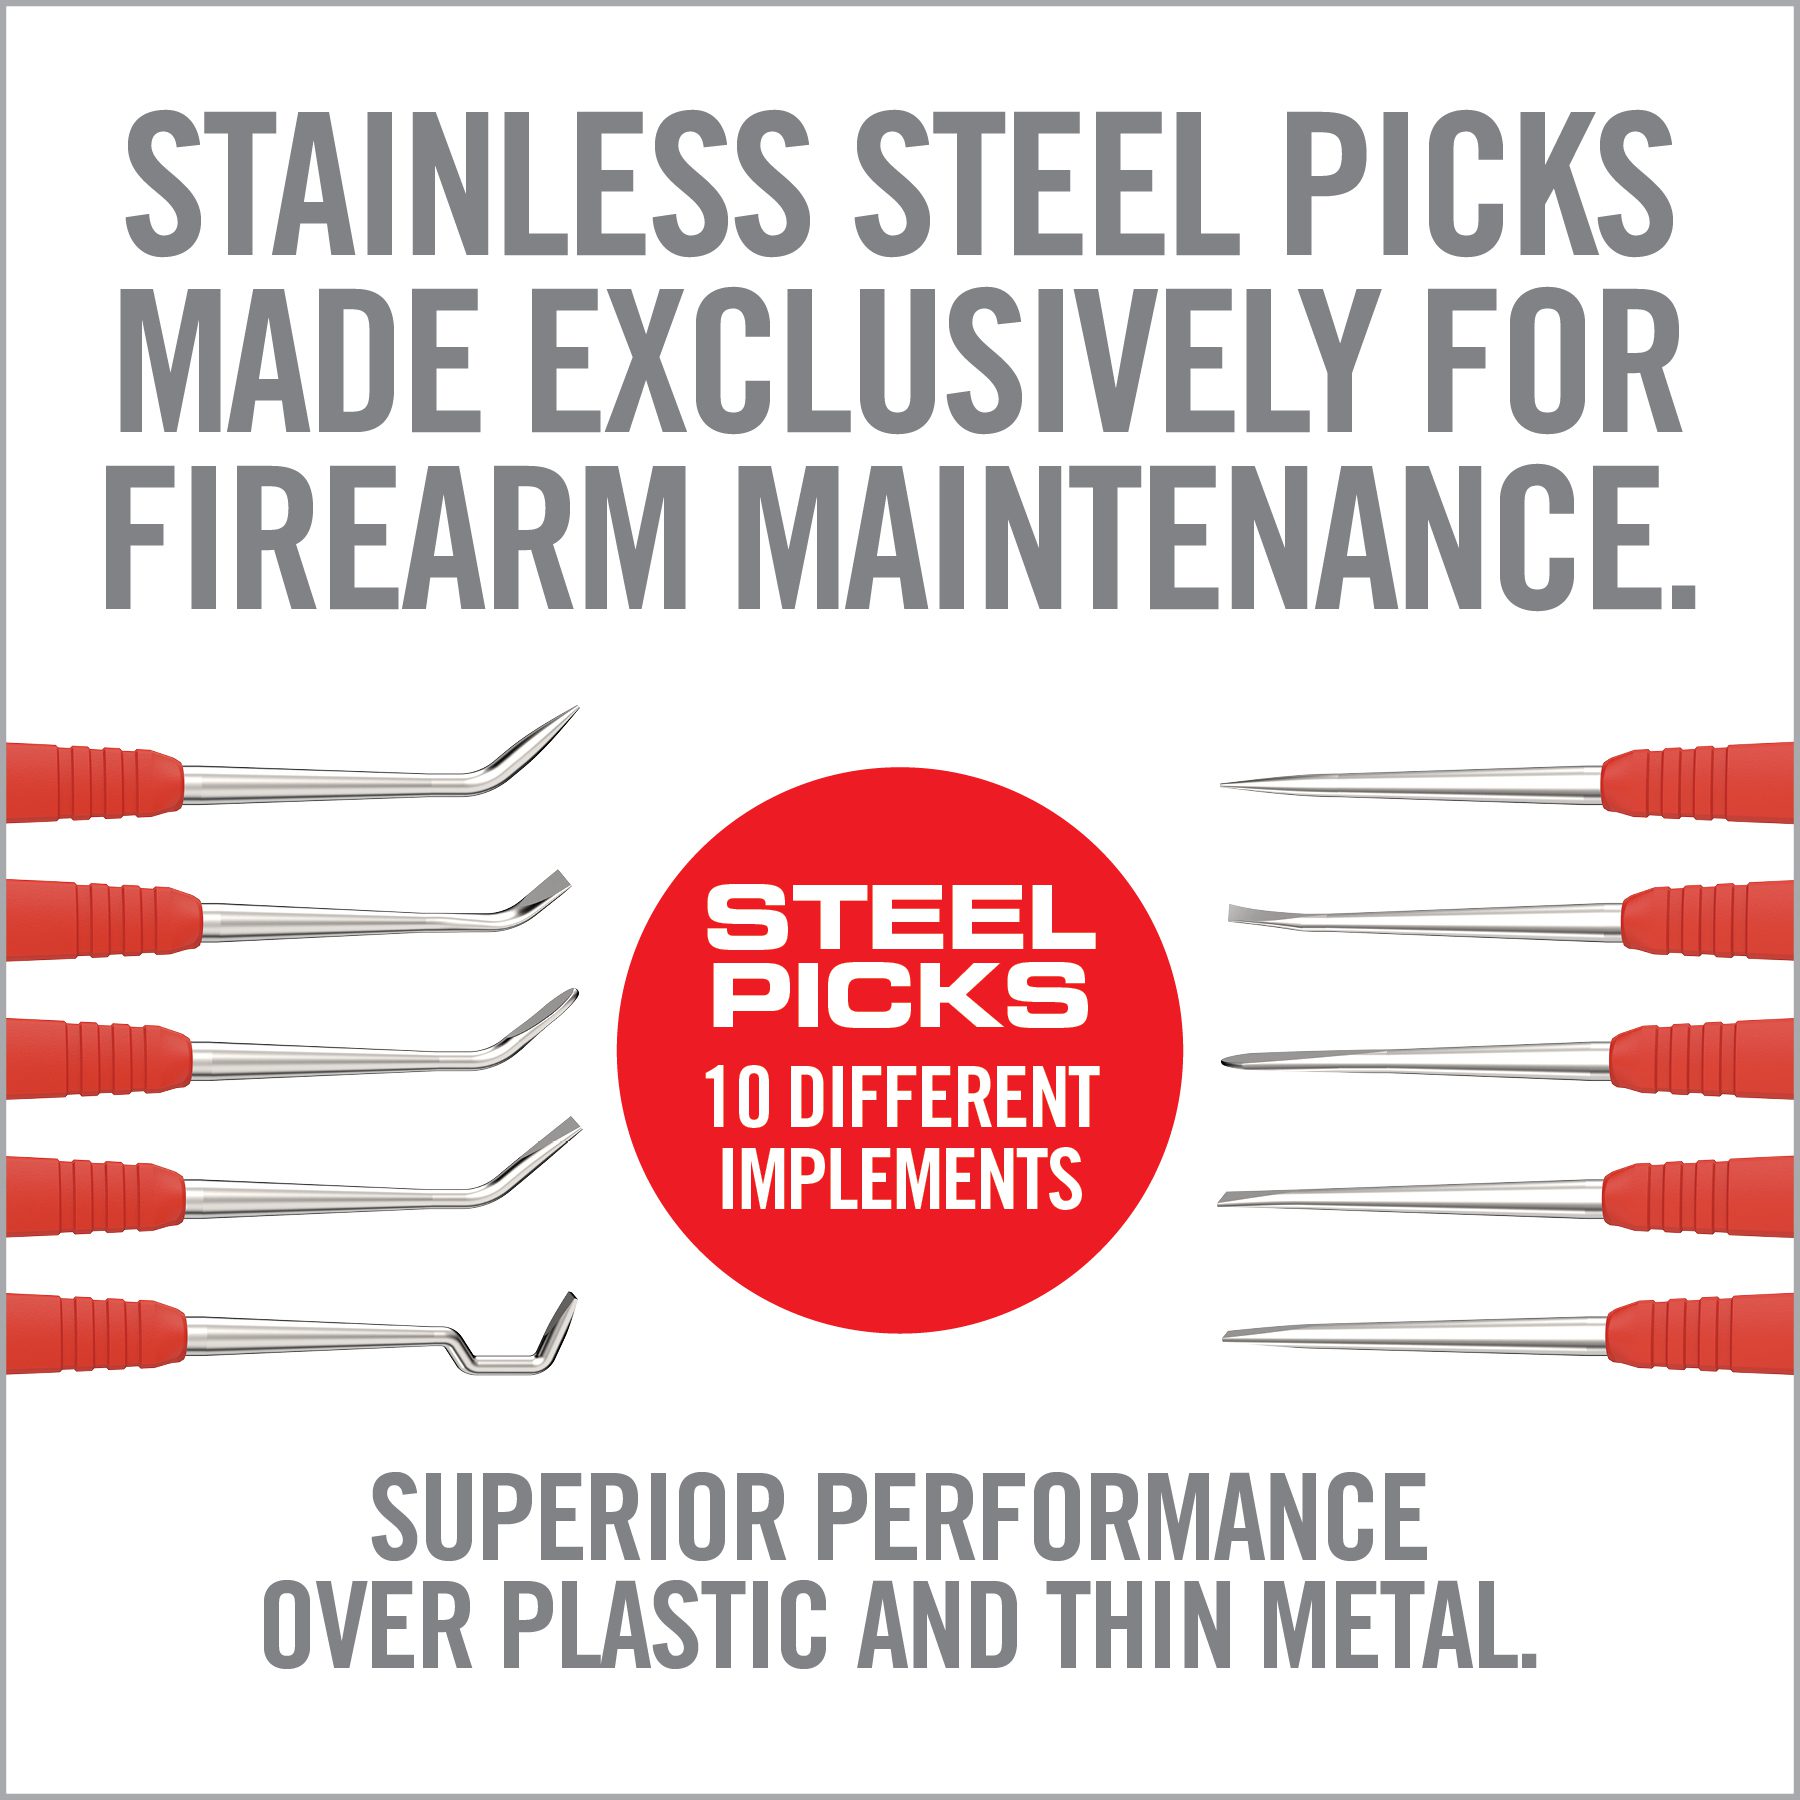 a poster advertising steel picks made exclusively for firearm maintenance